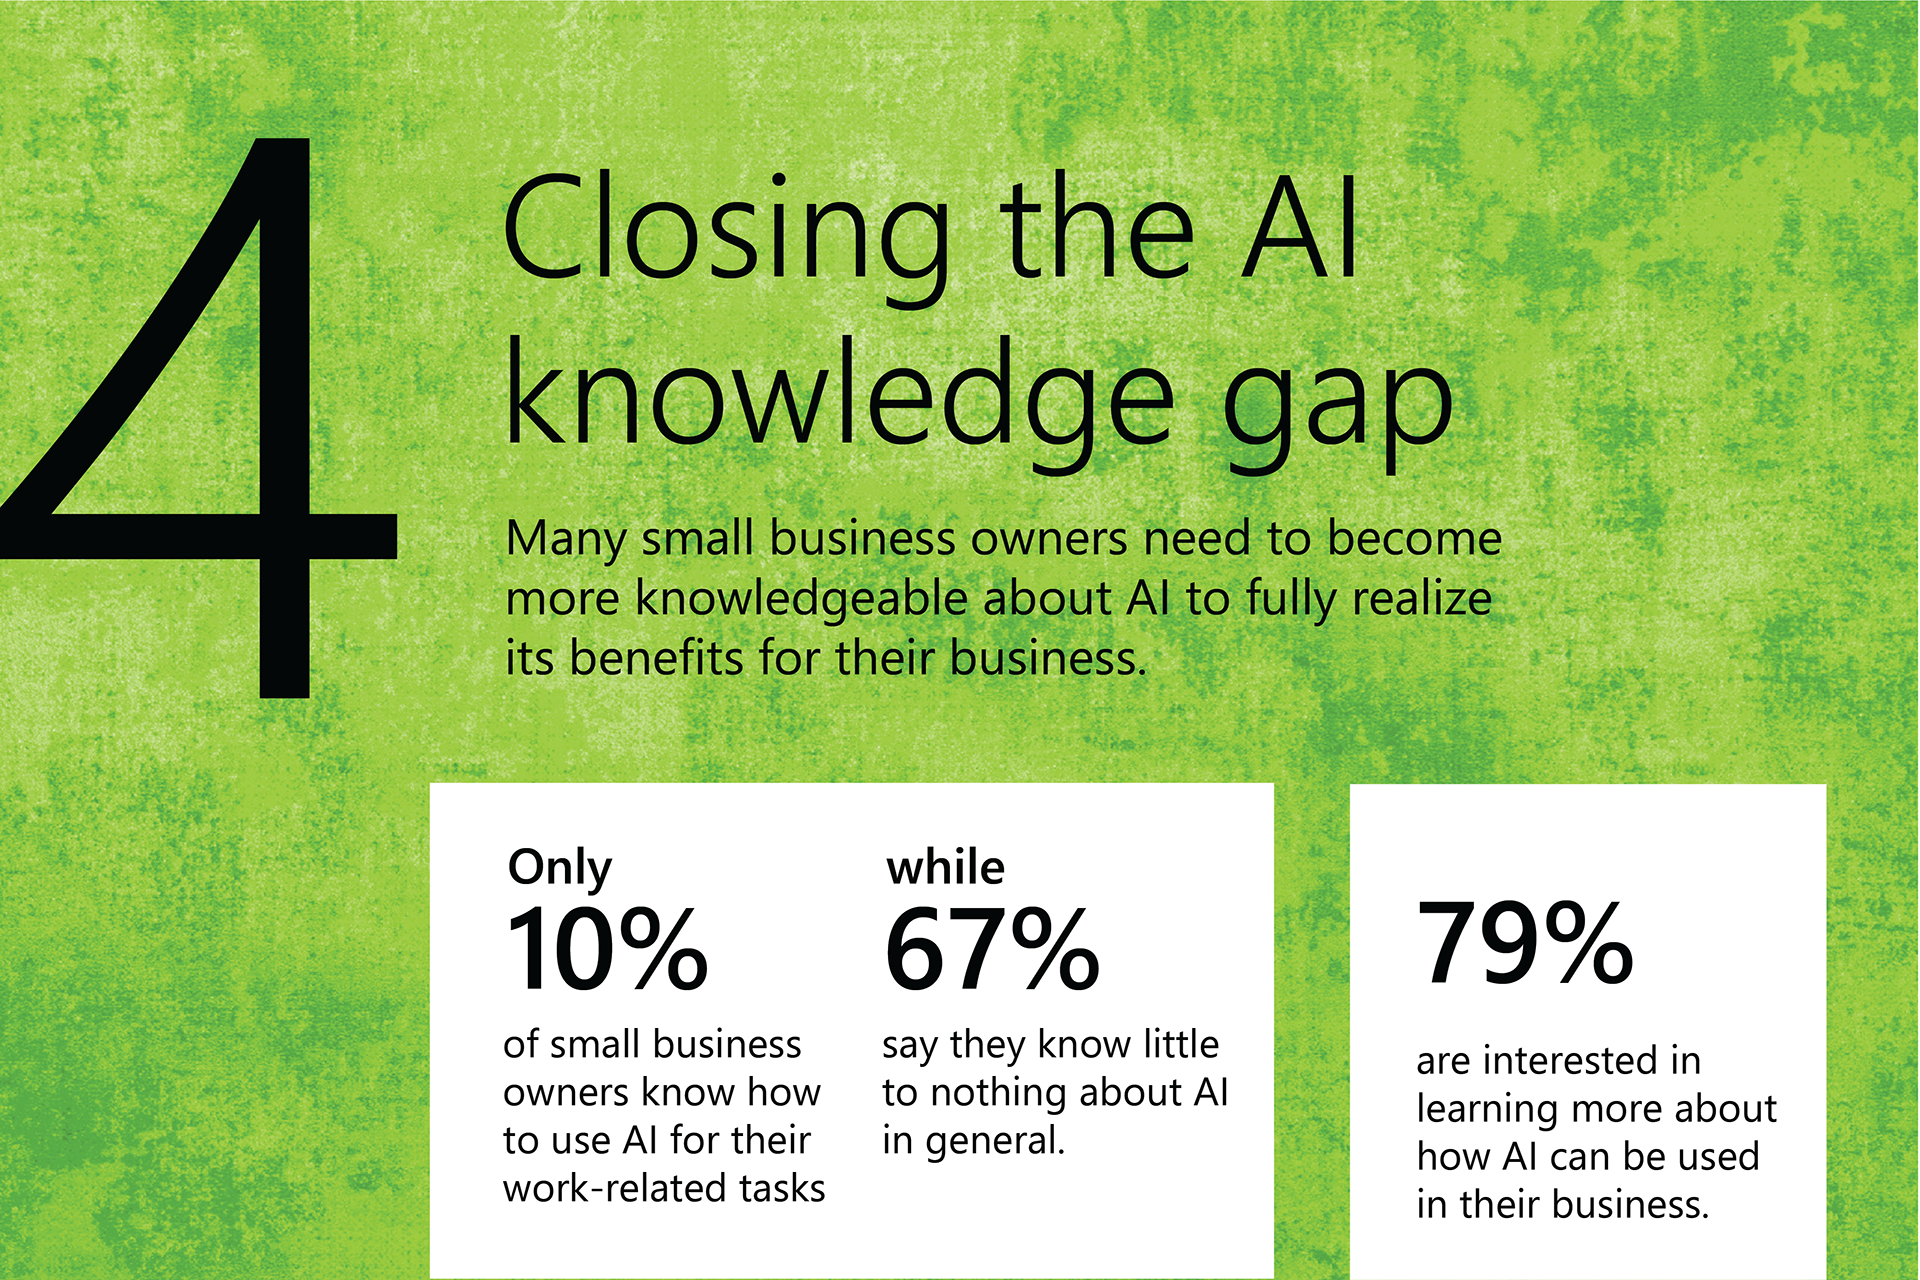 Graphic depiction of data provided in the Closing the AI knowledge gap portion of the blog post